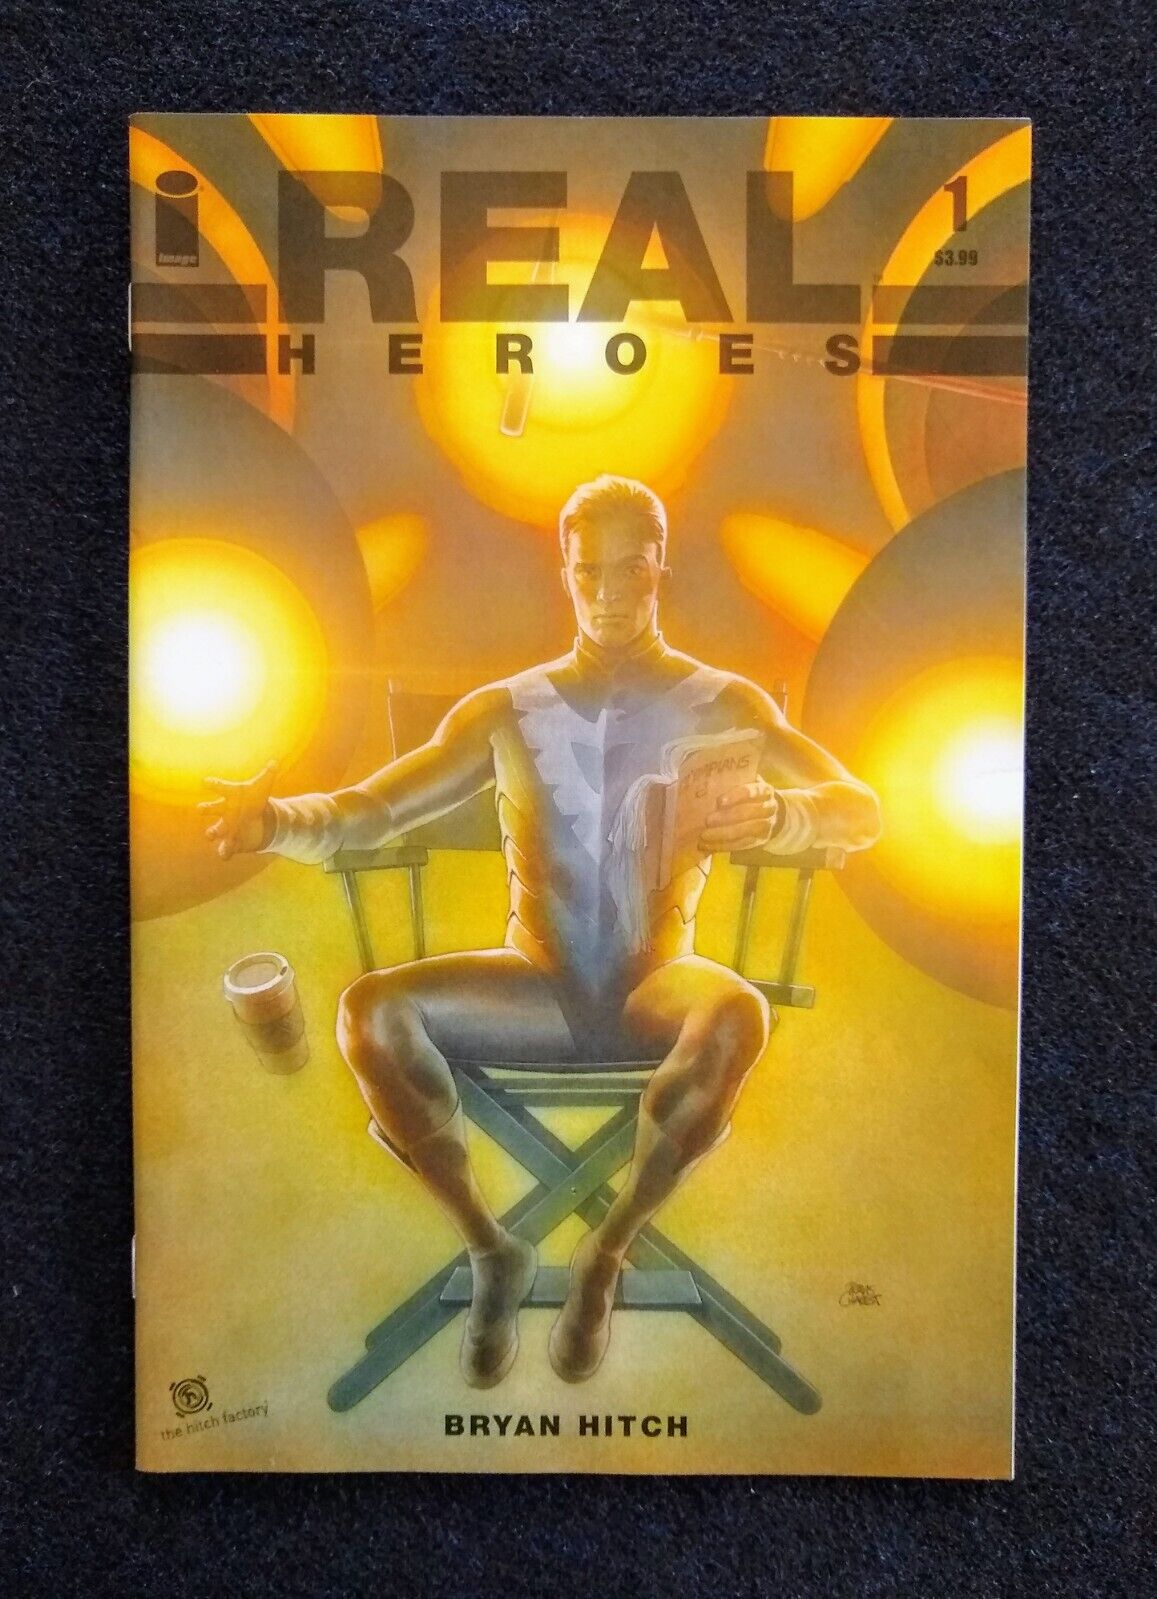 Real Heroes #1D Image 2014 Comic Book Bryan Hitch, Nearby, Martin, Gill